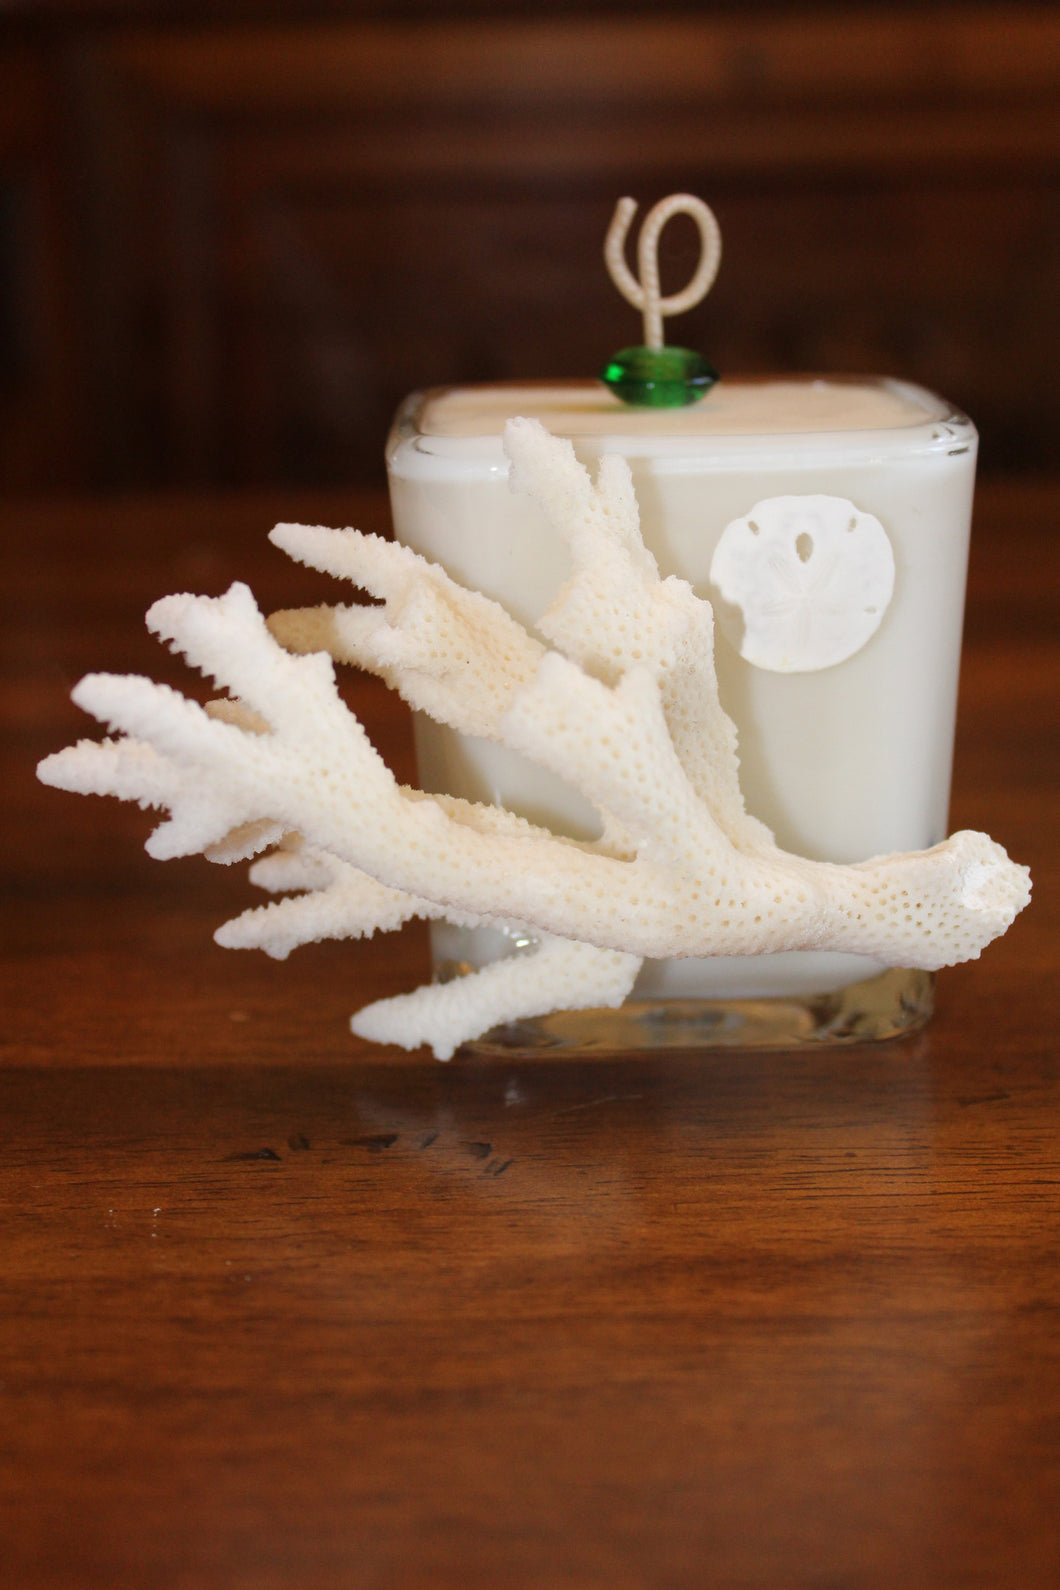 Sold - Natural Coral & Sand Dollar Design, Coconut Soy Square Candle, Cucumber Mint Scent